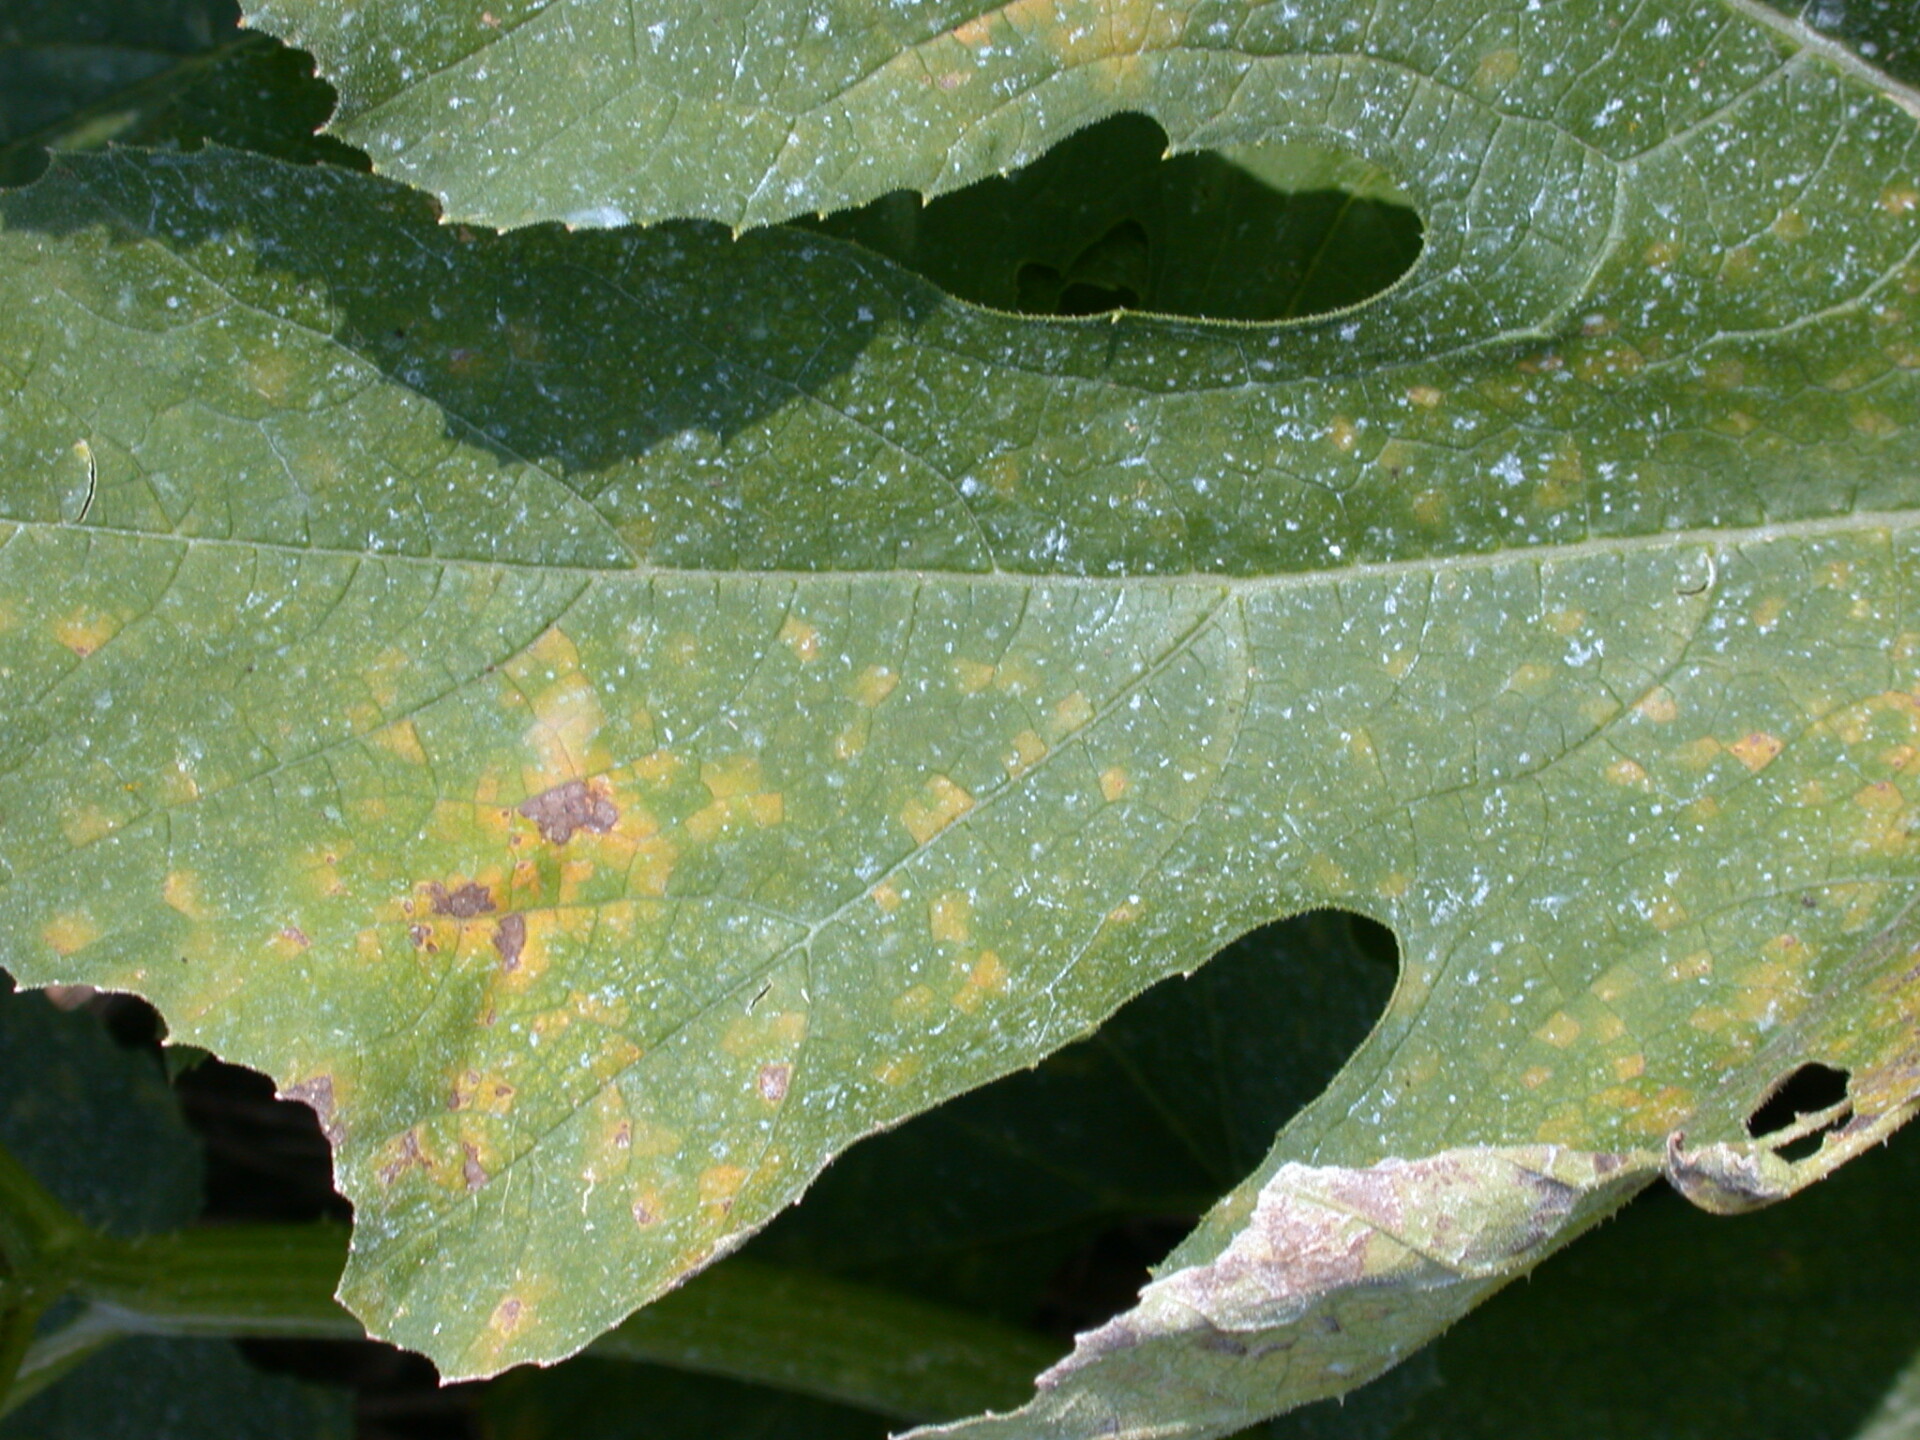 Downy mildew of pumpkin. Lesions tend to be angular and are initially chlorotic. Note older lesions have turned necrotic.